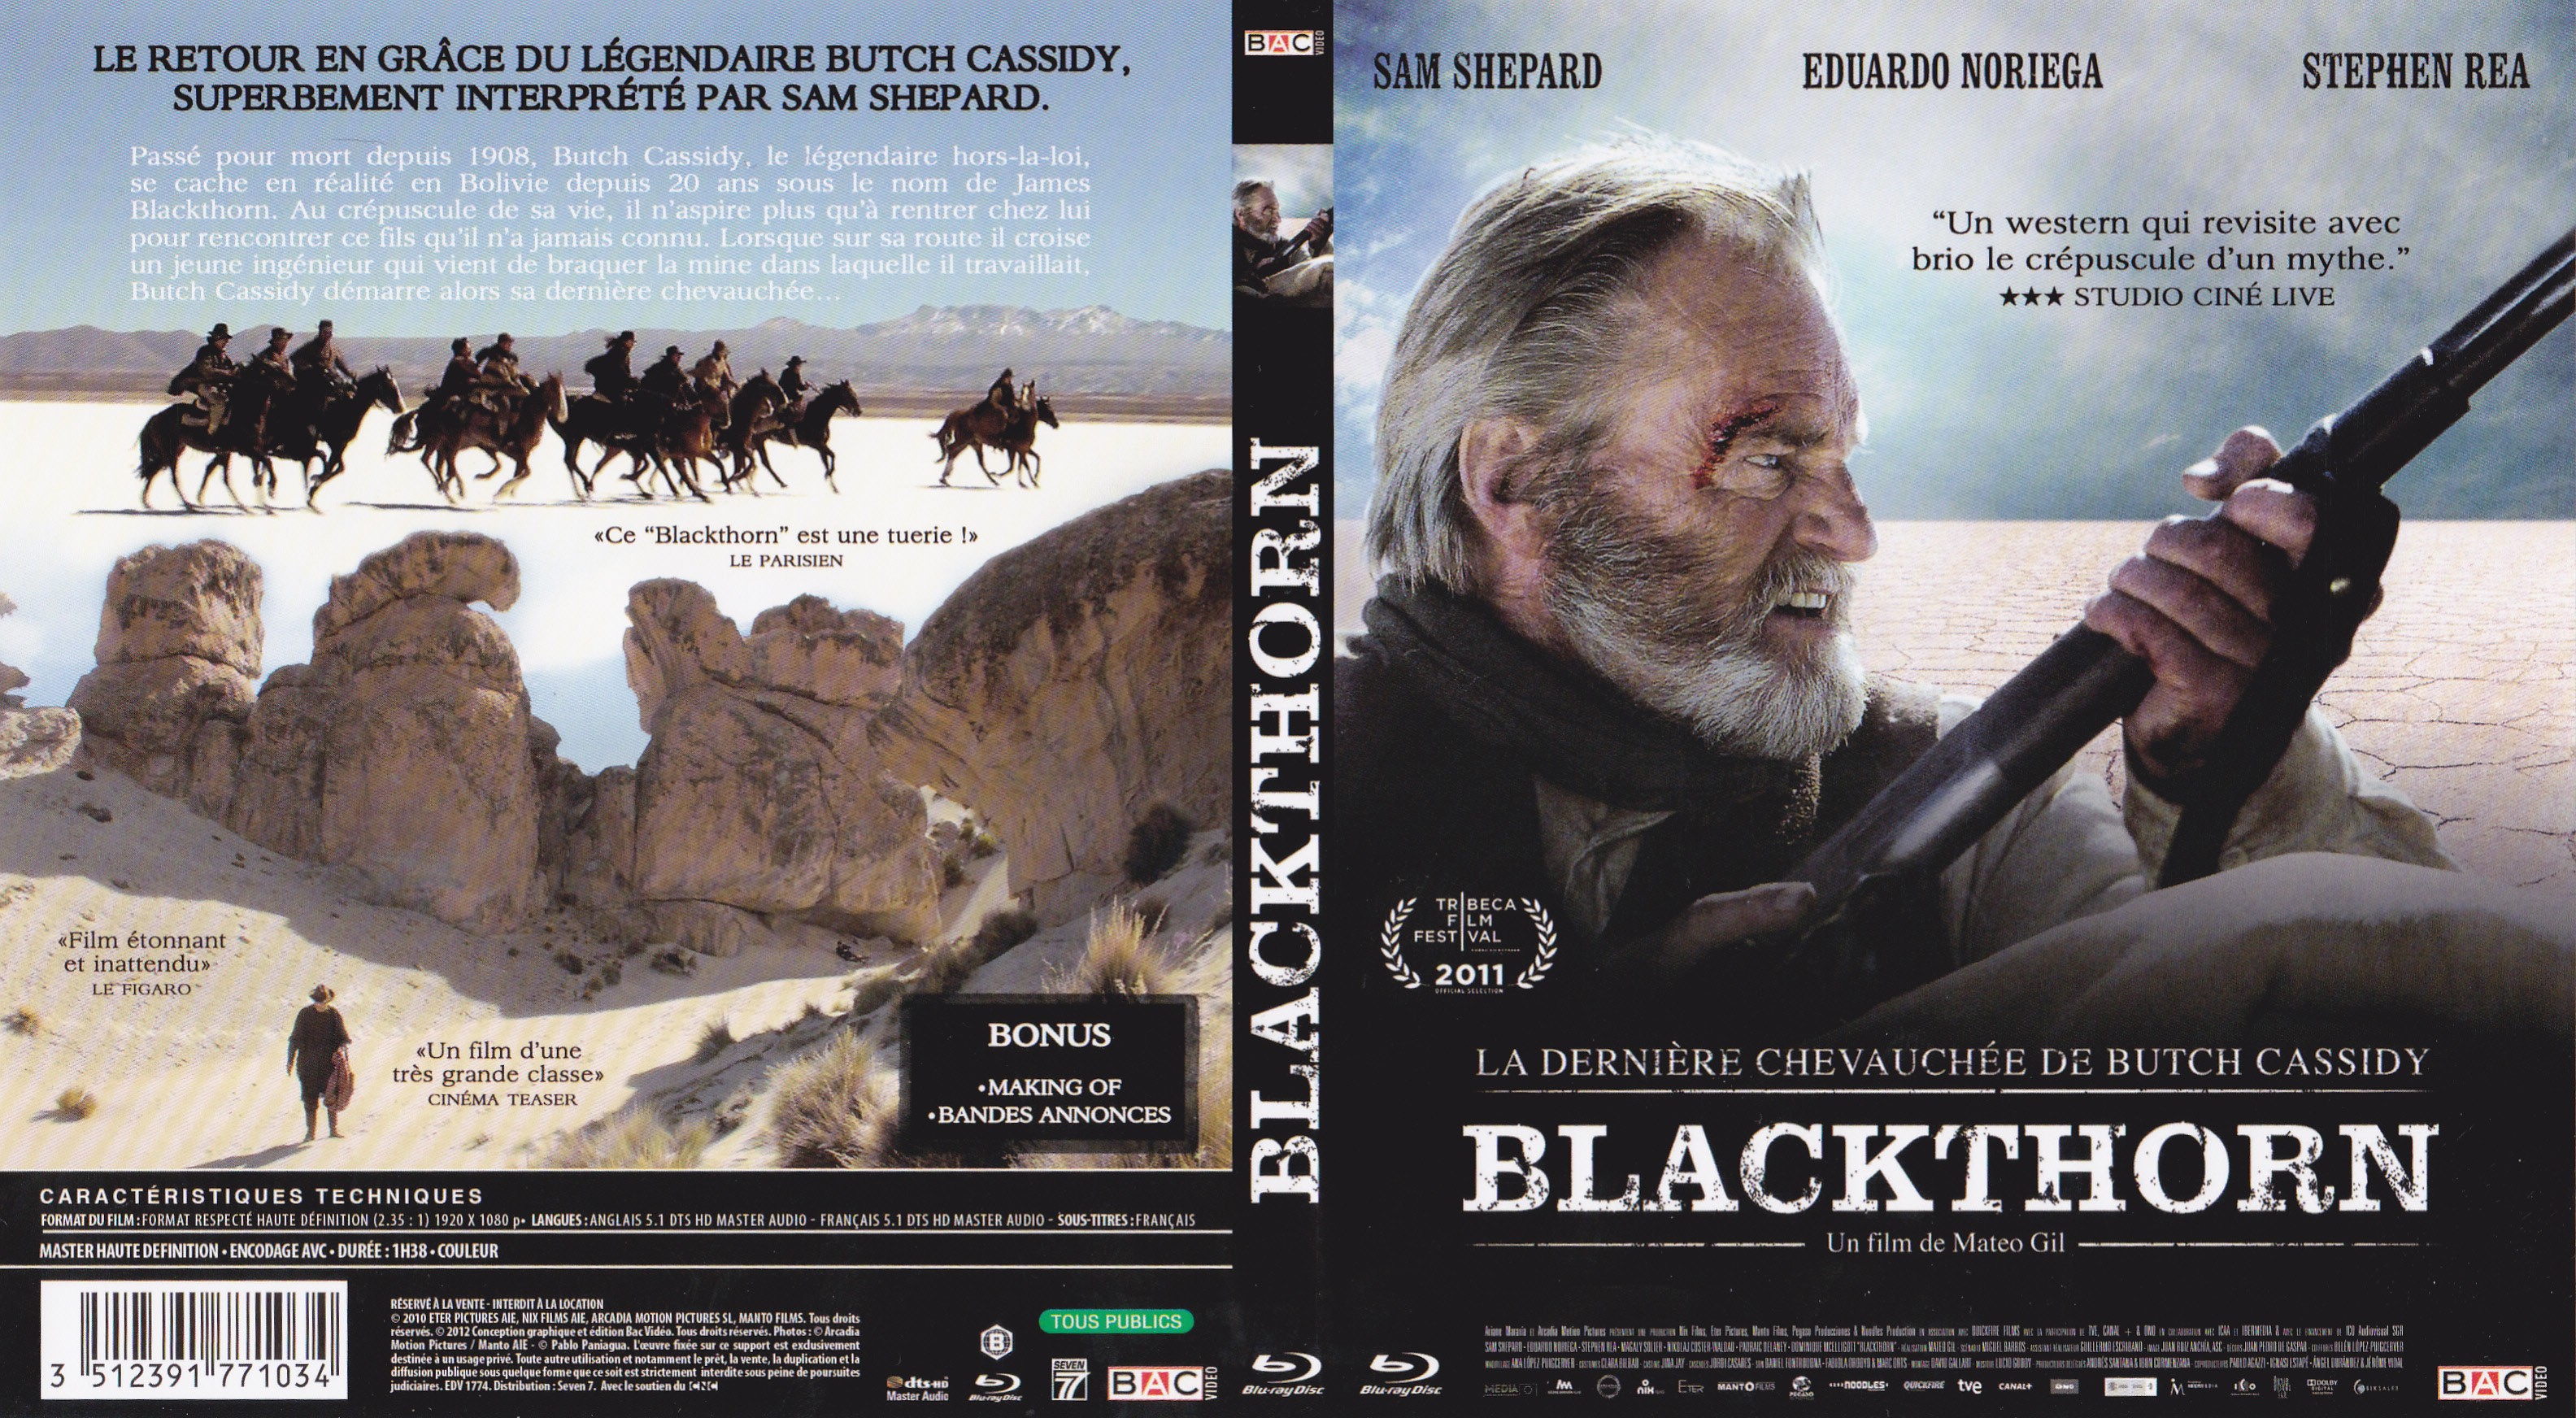 Jaquette DVD Blackthorn (BLU-RAY)